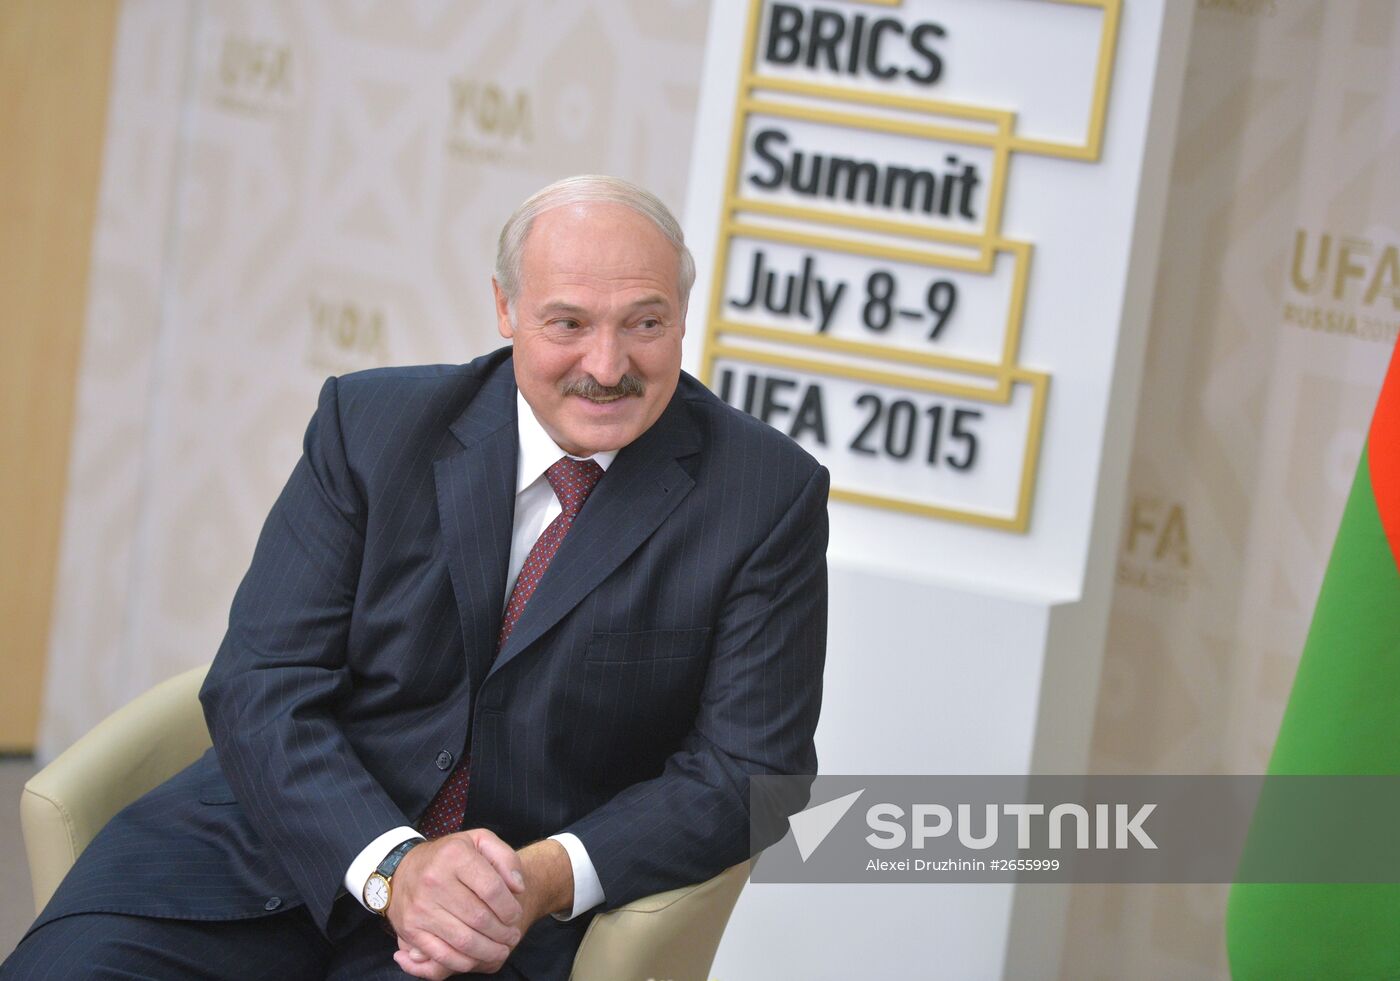 President of the Russian Federation Vladimir Putin meets with President of the Republic of Belarus Alexander Lukashenko